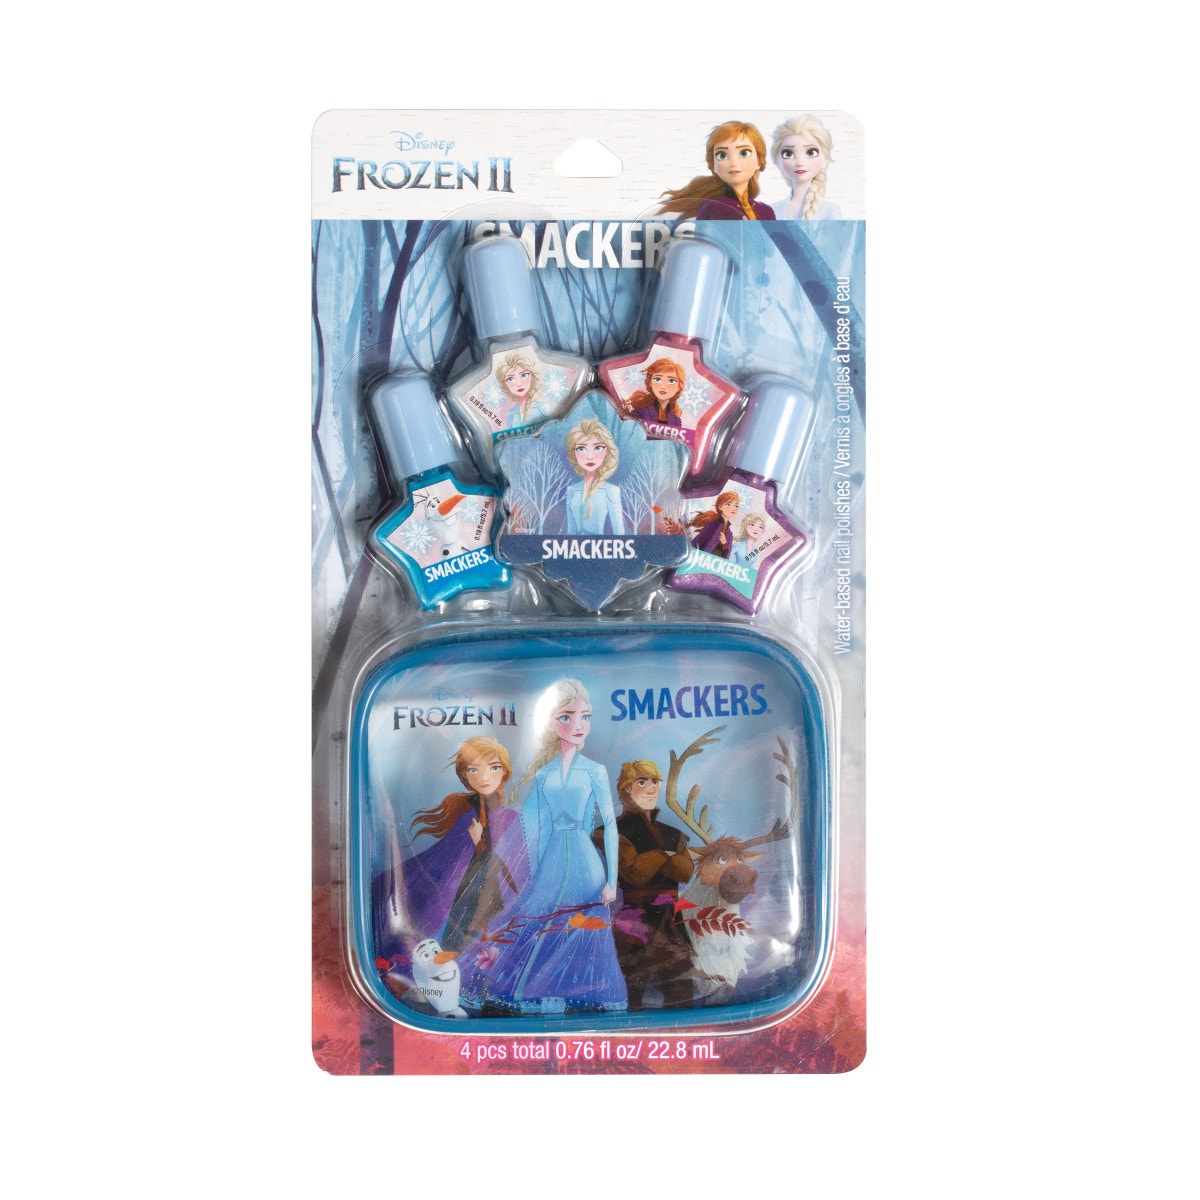  Frozen Lunch Box for Girls - 4 Pc Bundle with Frozen